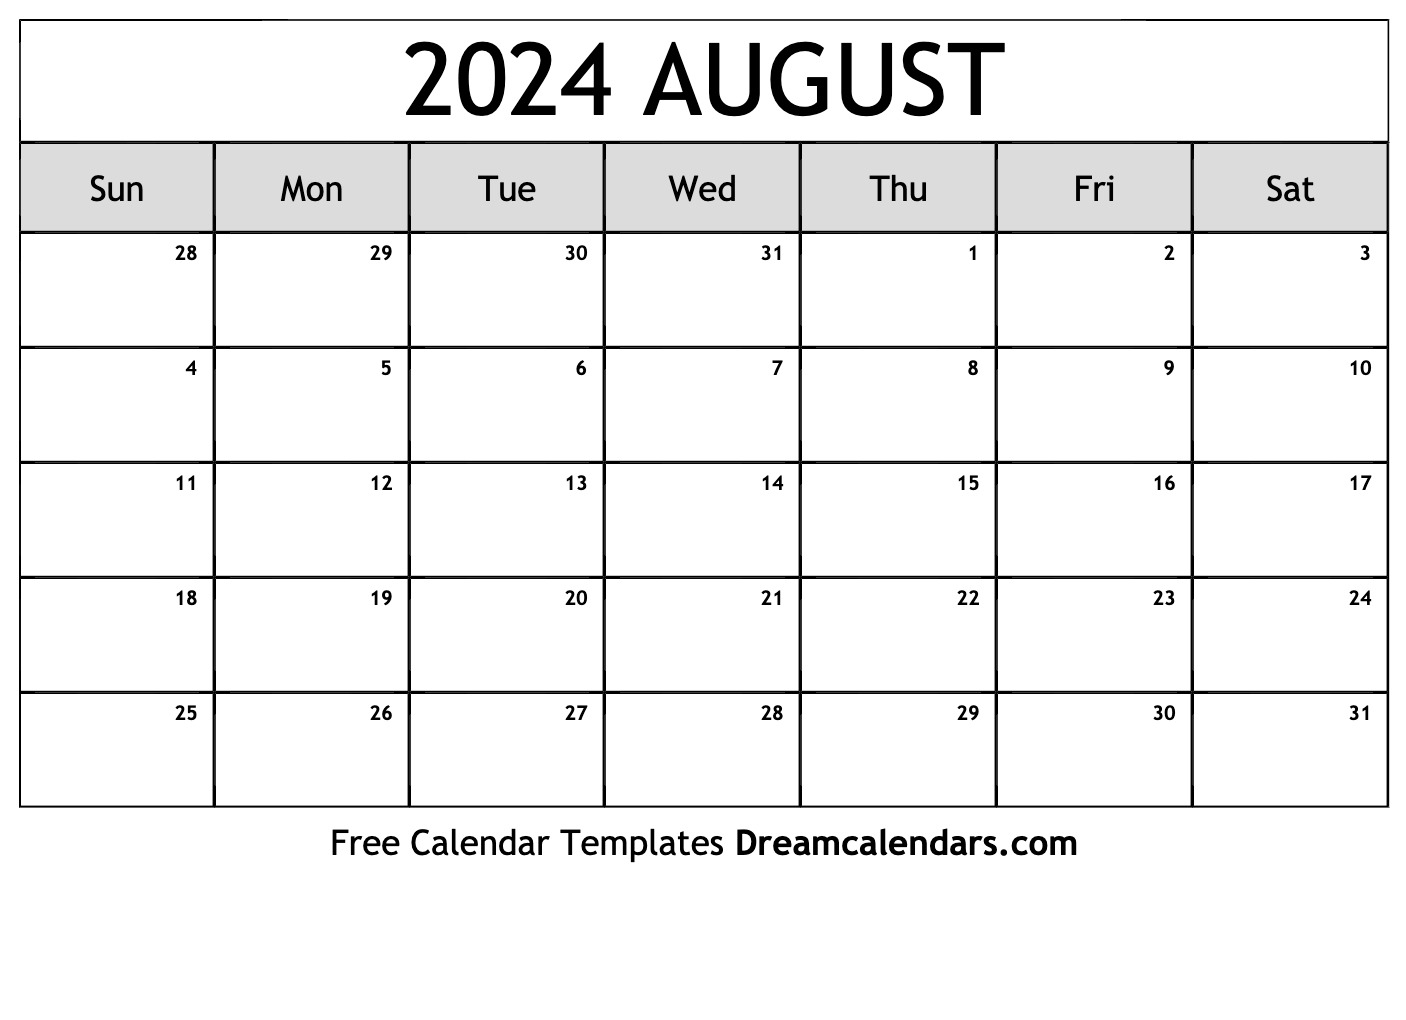 August 2024 Calendar | Free Blank Printable With Holidays for Free Printable August Calendar 2024